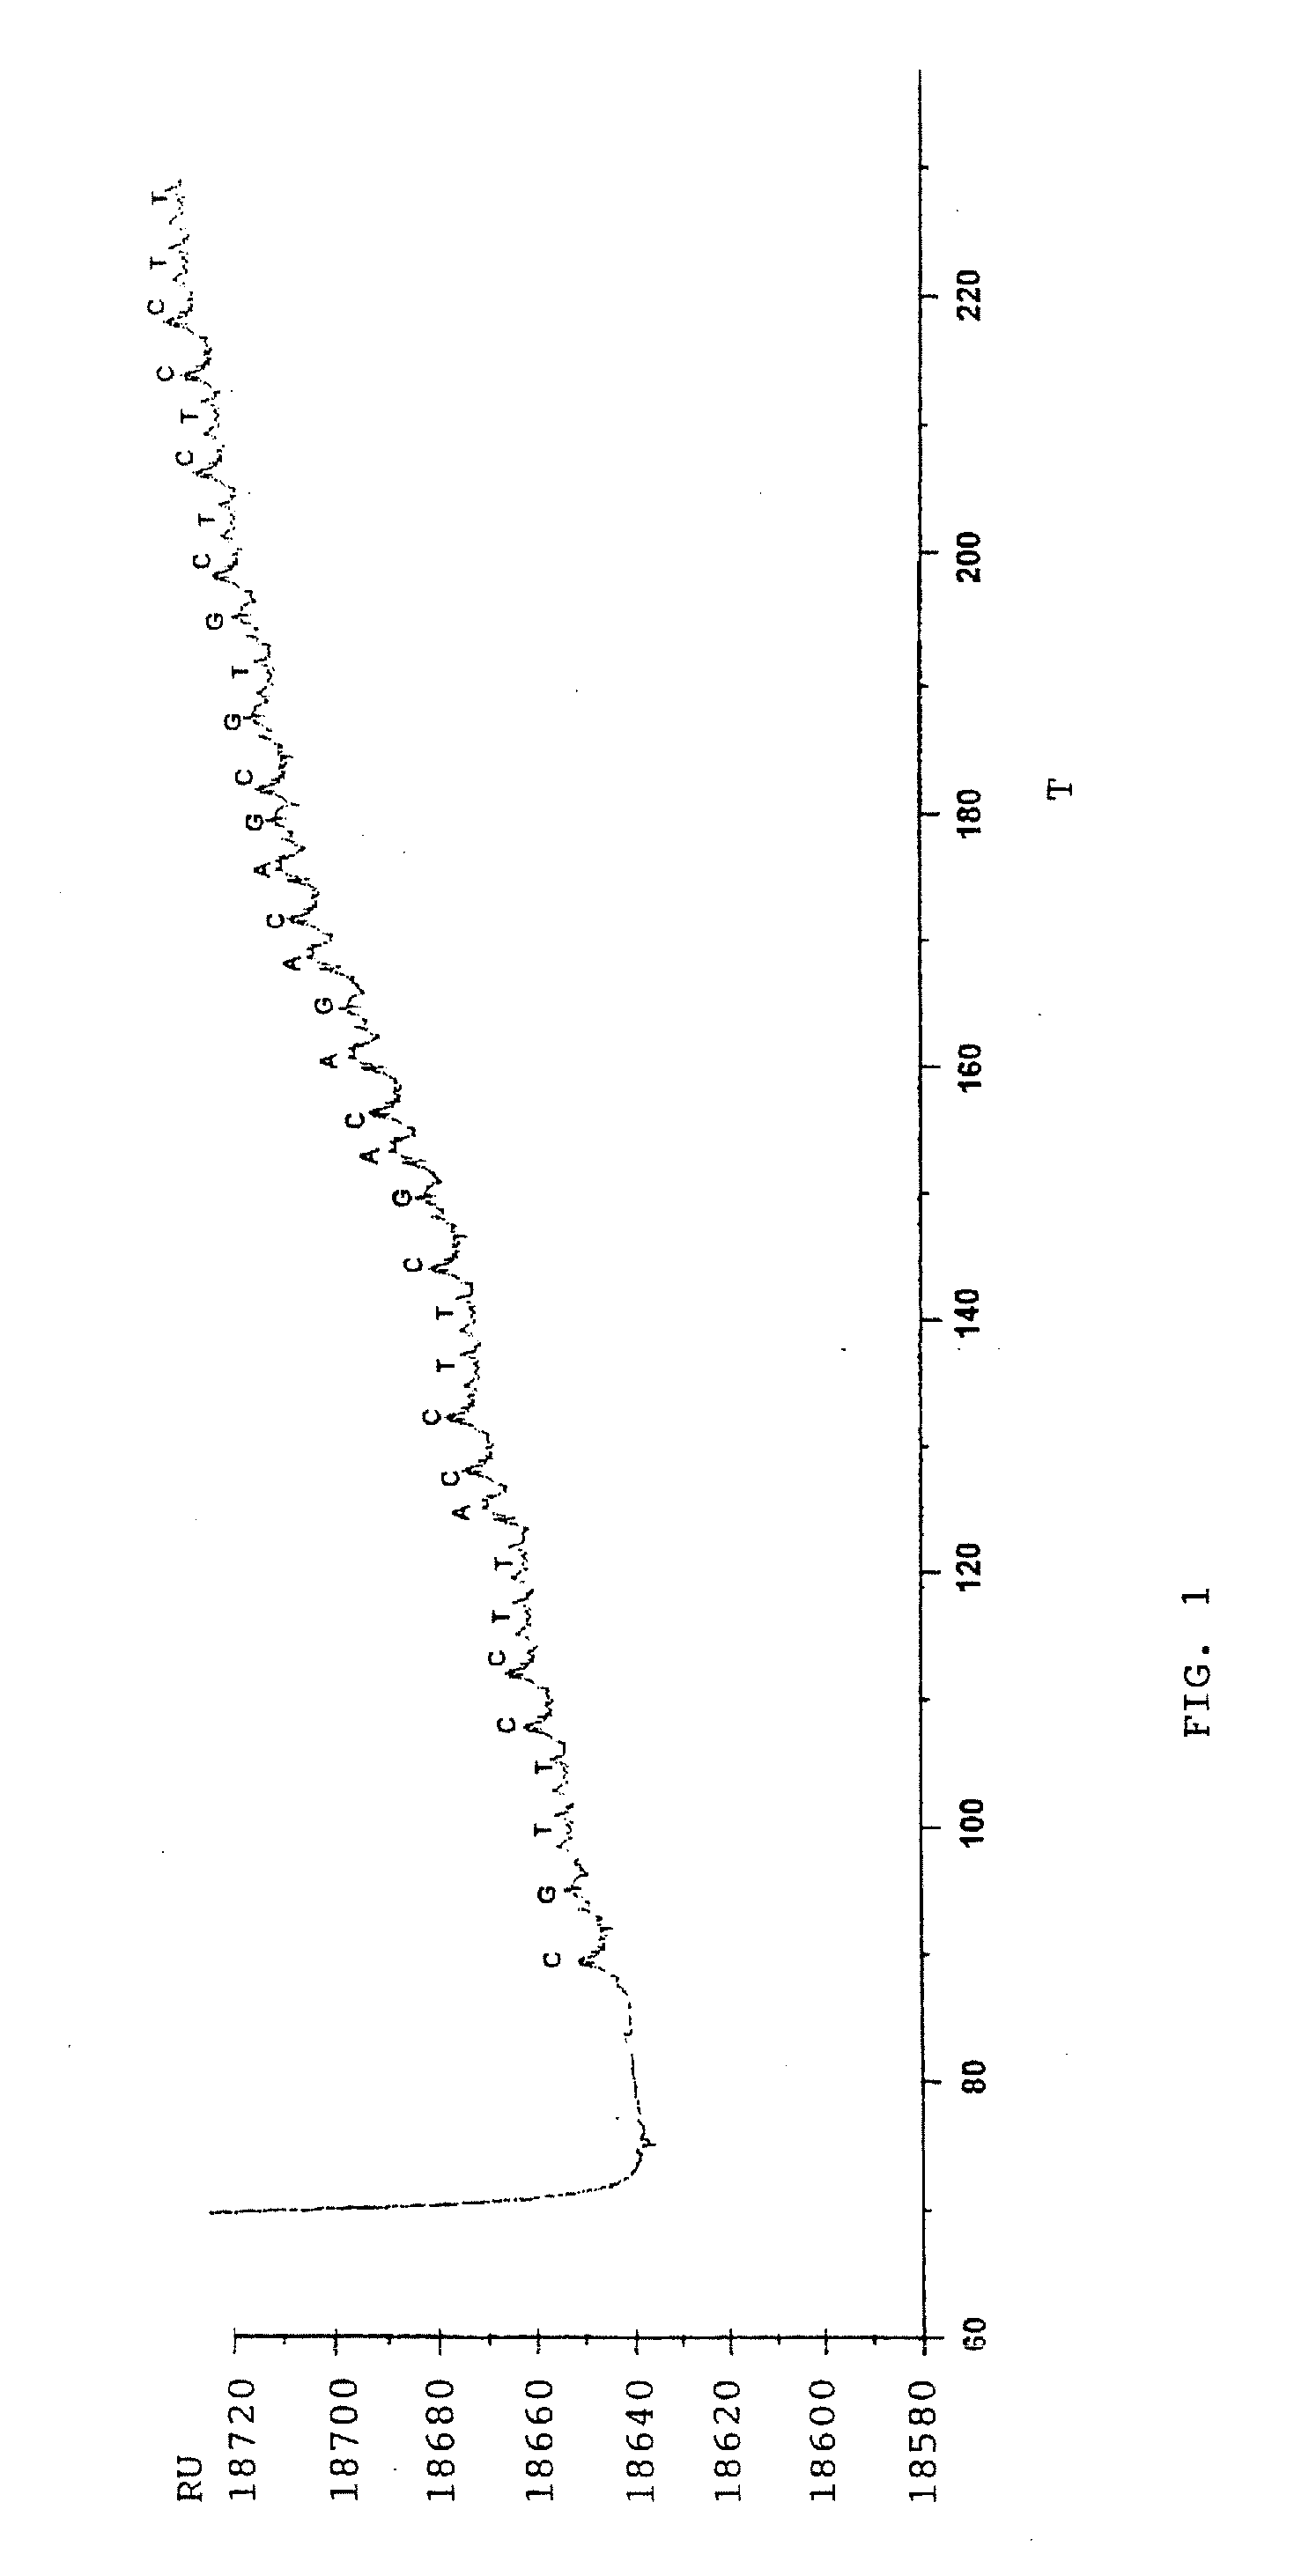 Polynucleotide Sequencing Using a Helicase